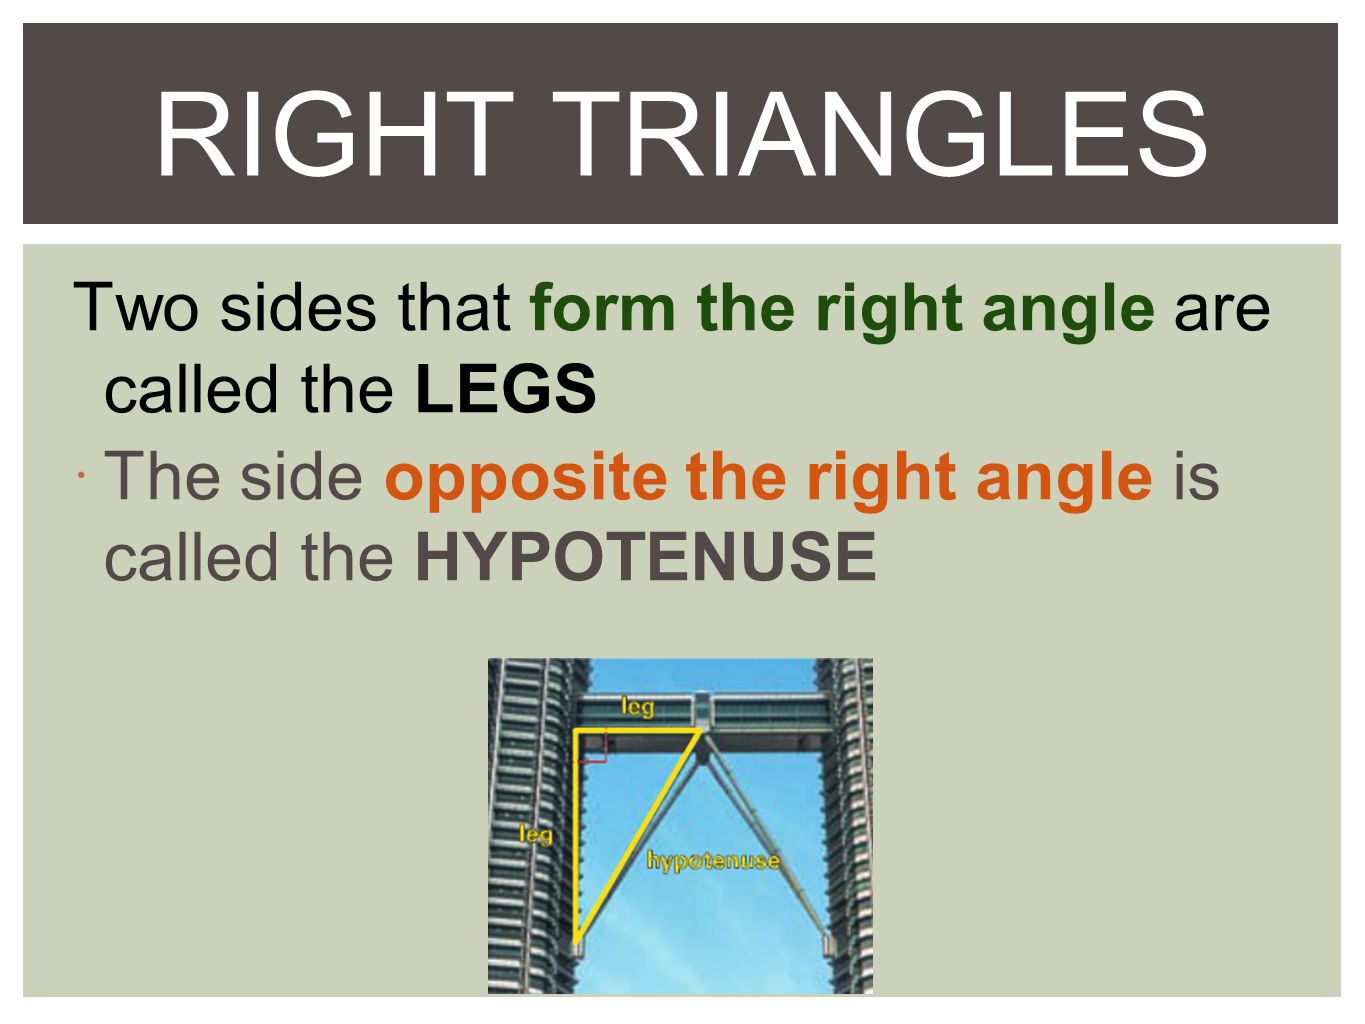 RIGHT TRIANGLES Two sides that form the right angle are called the LEGS.